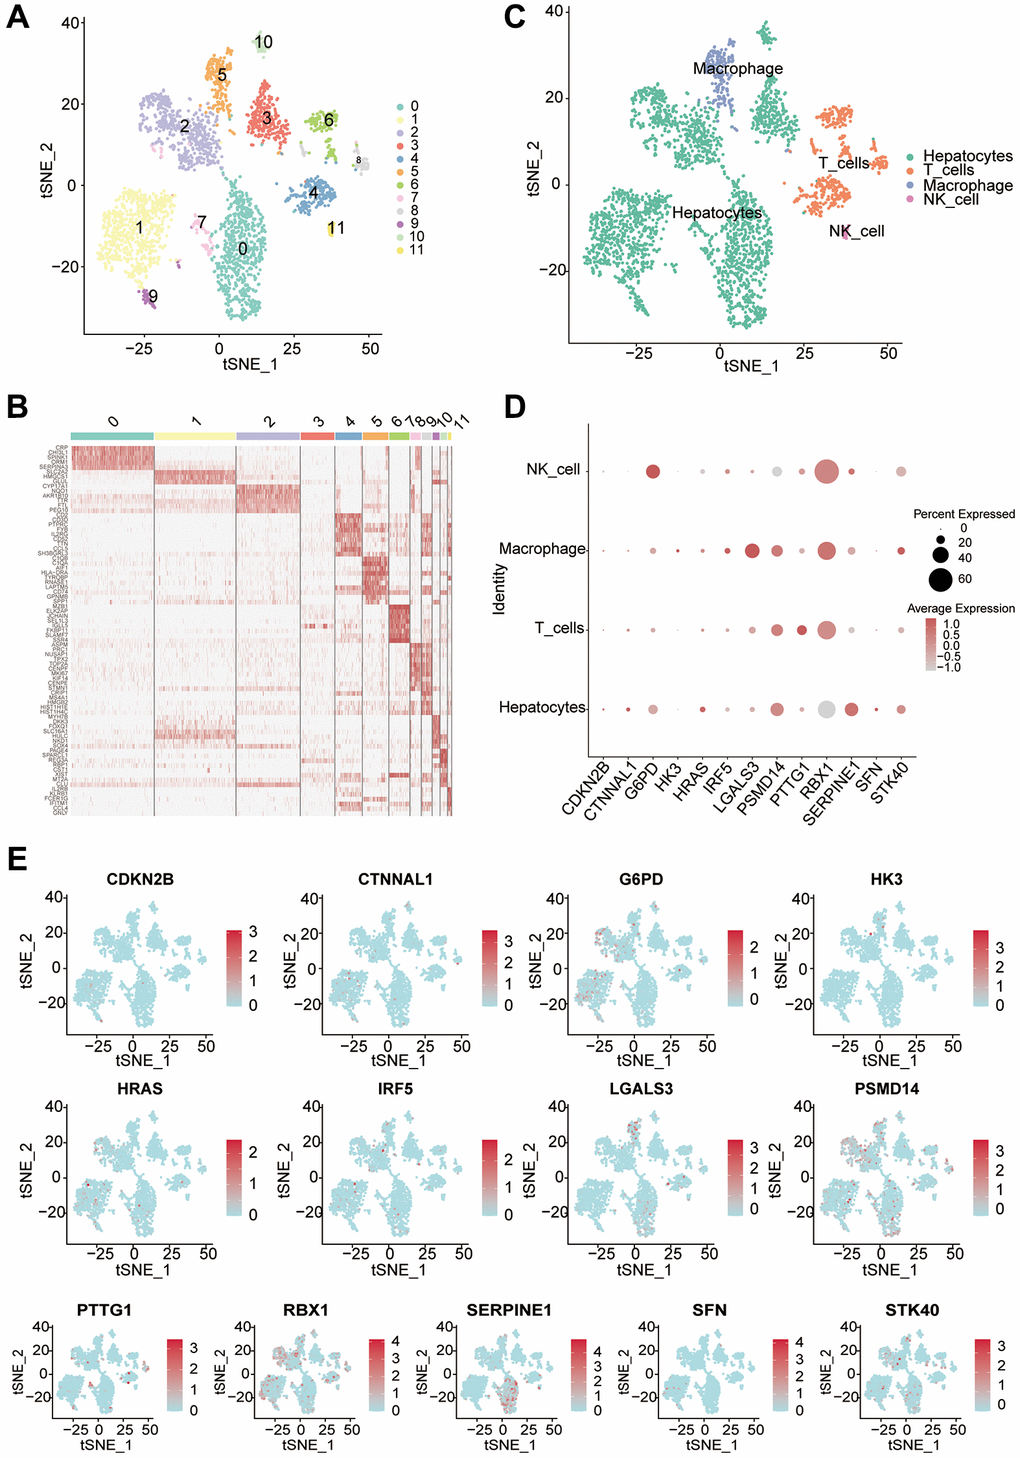 Single-cell analysis reveals the expression of differential genes in different cell types. (A) Using the tSNE algorithm to dimensionalize the samples into 12 clusters. (B) Heat map clearly showing the major differentially expressed genes in different clusters. (C) The Seurat package annotates different clusters with a total of 4 classes of cells. (D) The bubble diagram shows the expression of difference genes in different cells. (E) Visualization of 13 differential genes by single-cell sequencing.